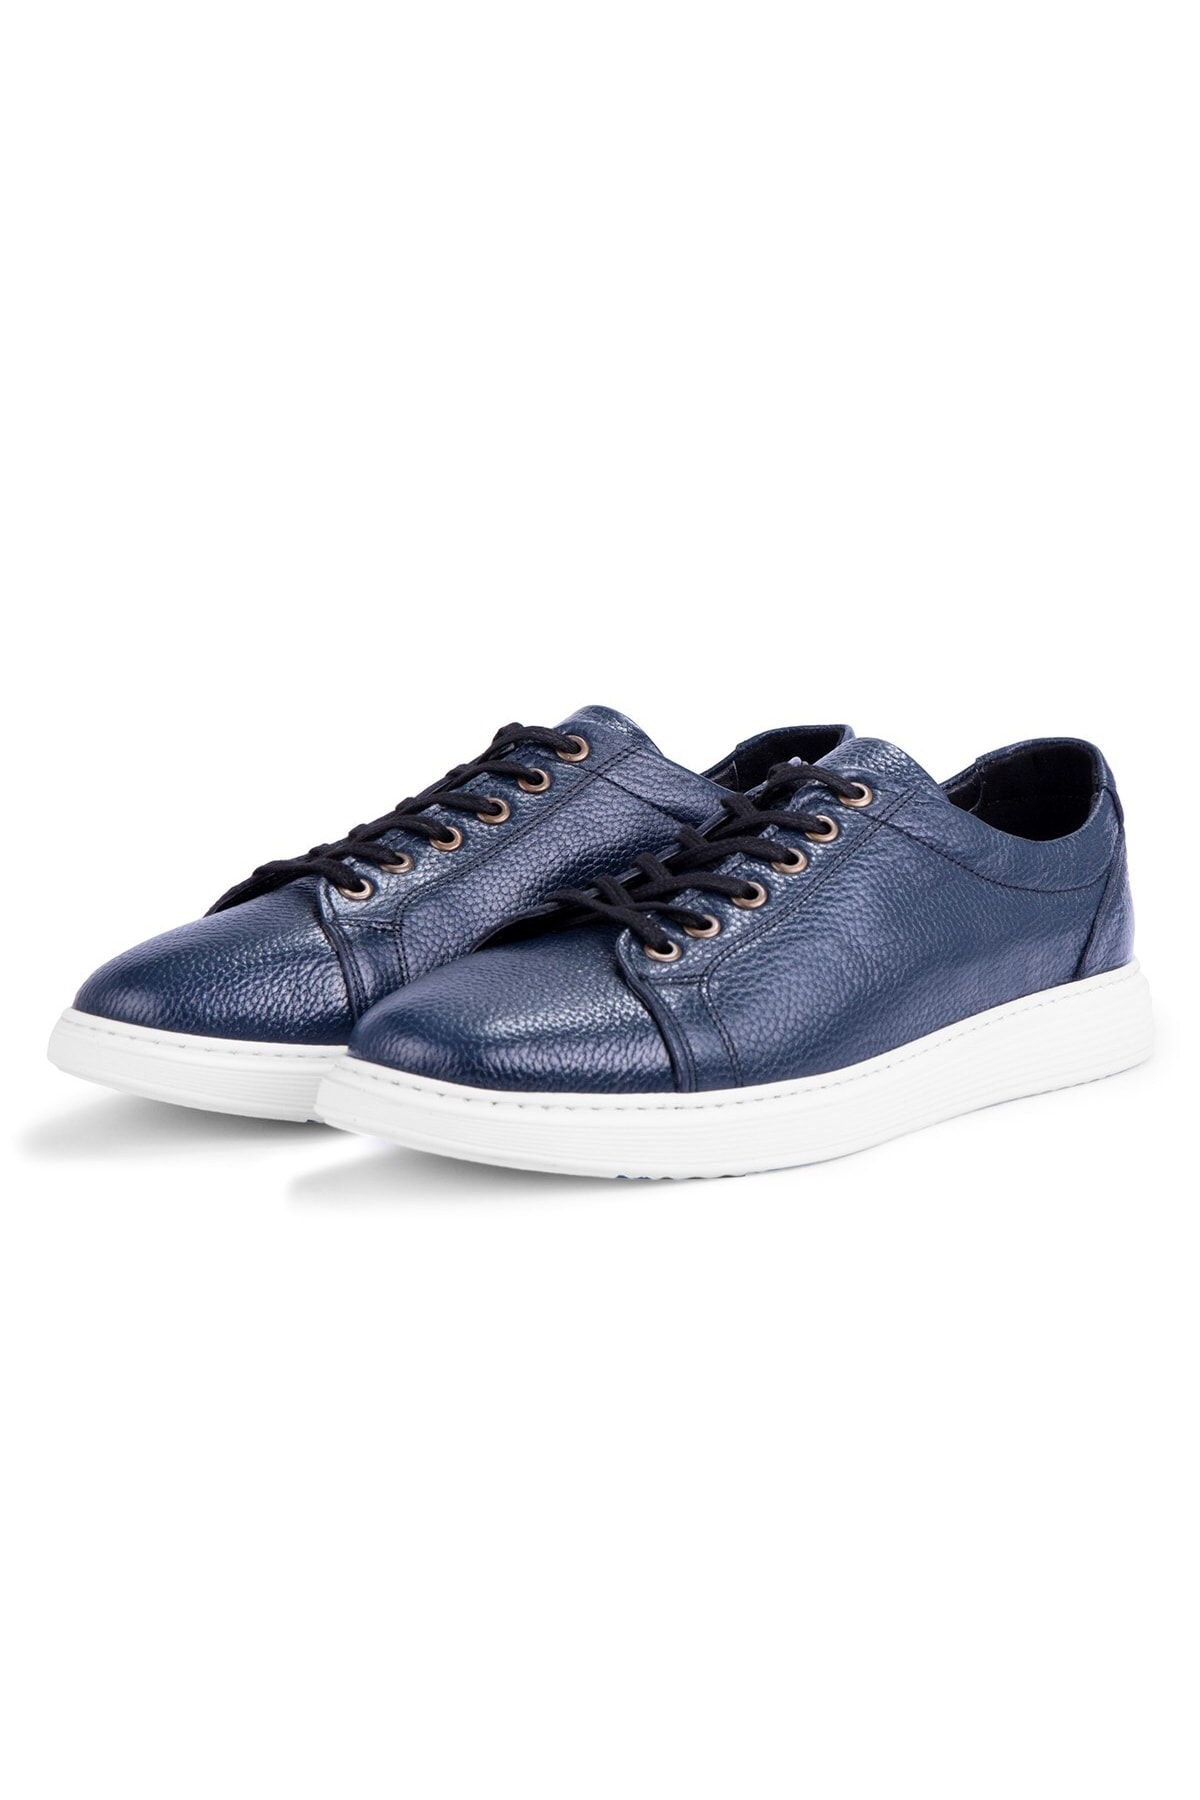 Levně Ducavelli Verano Genuine Leather Men's Casual Shoes. Summer Sports Shoes, Lightweight Shoes Navy Blue.